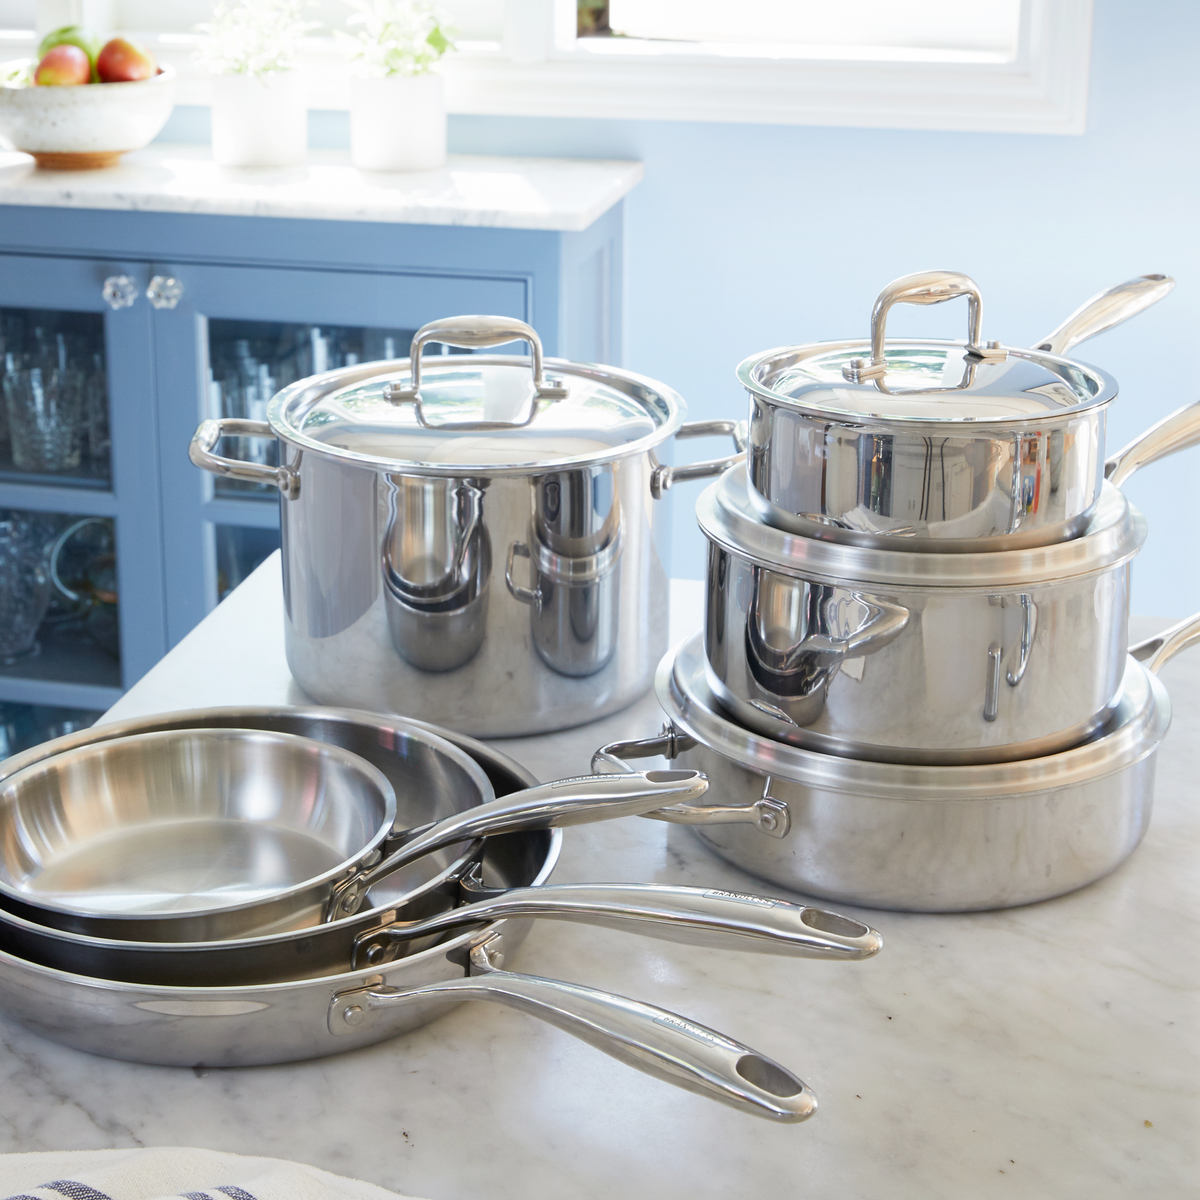 Product photo, 8, 10, and 12 inch fry pans, stock pot, saute pan, and the 2 quart and 4 quart sauce pans.